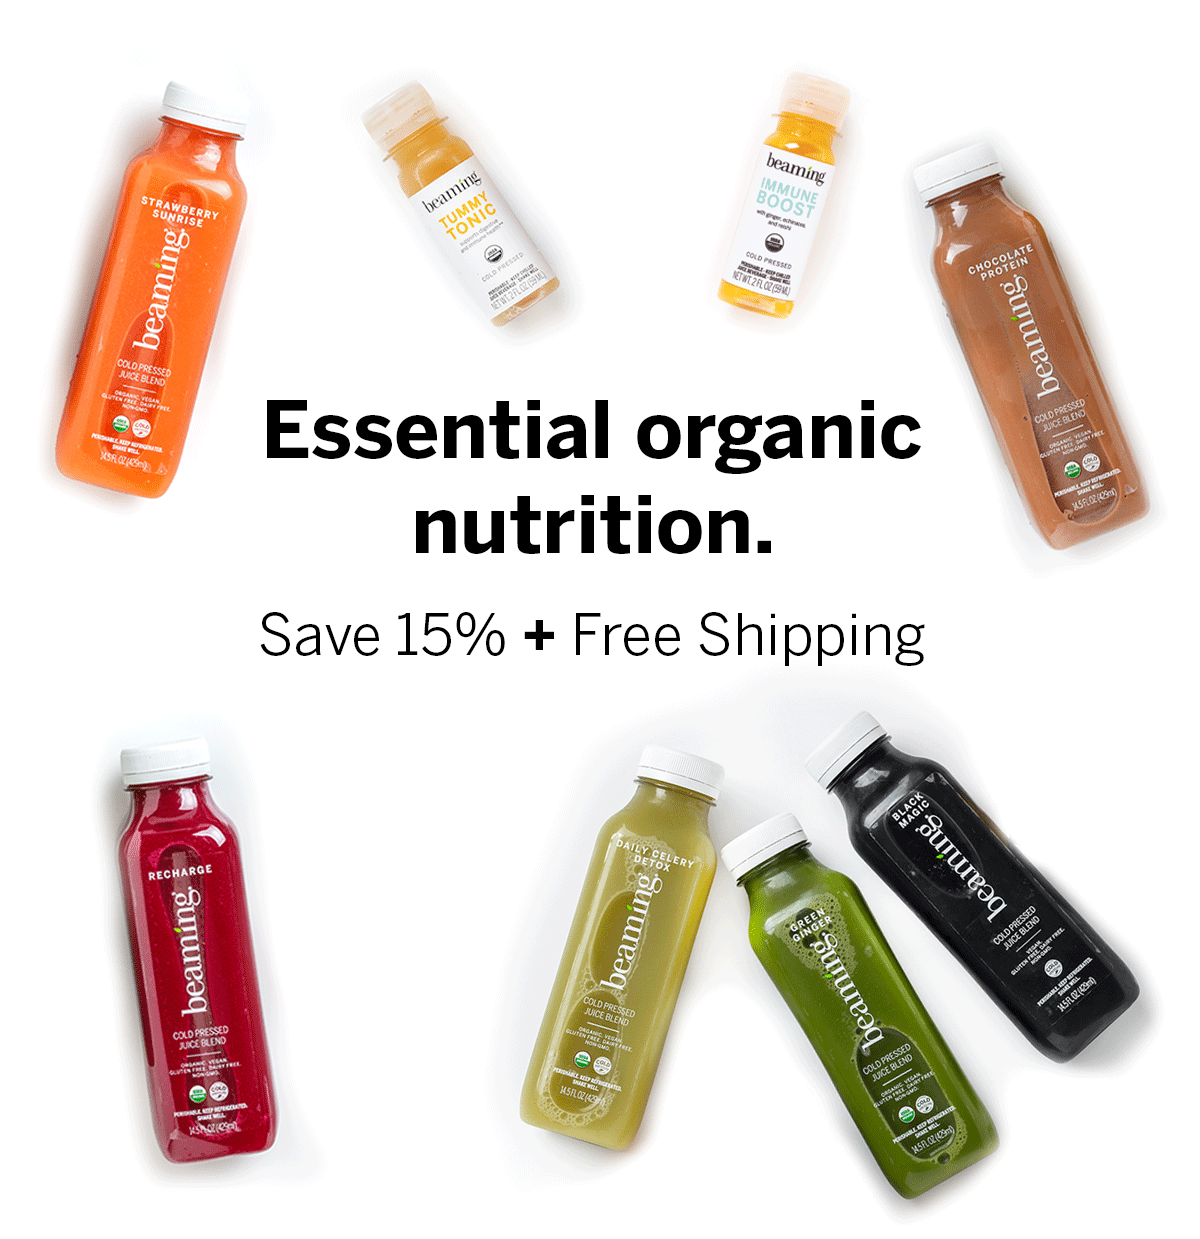 Essential organic nutrition. Save 15% + Free Shipping15% off